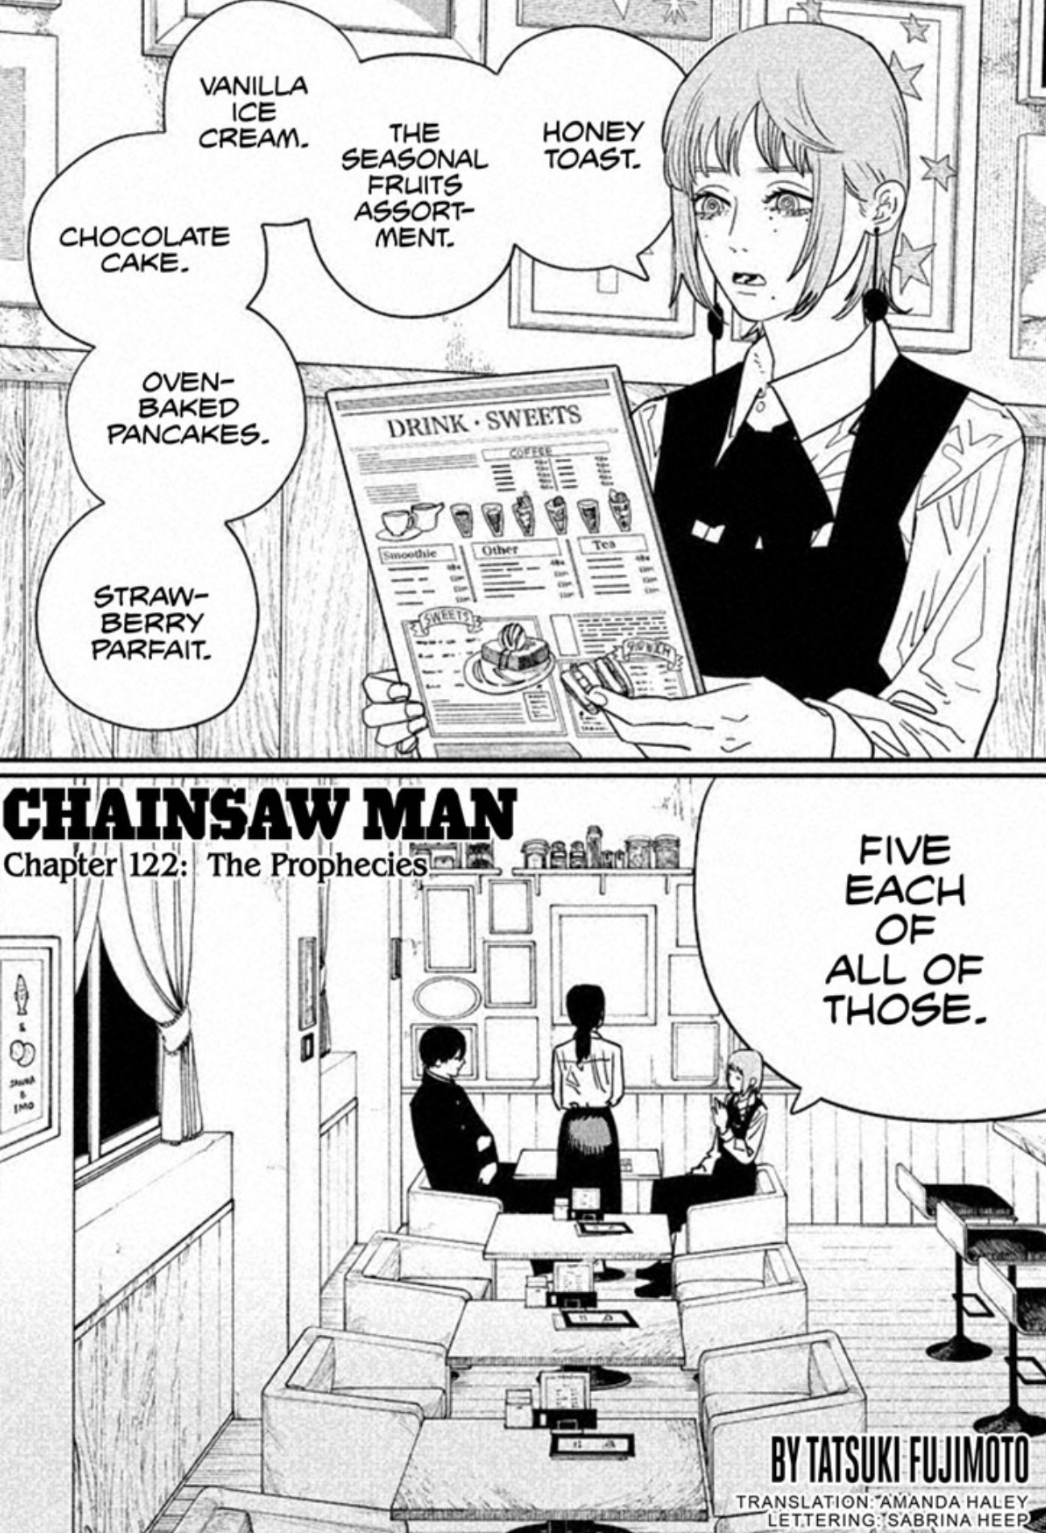 Chainsaw Man ep4 - Little Dreams - I drink and watch anime